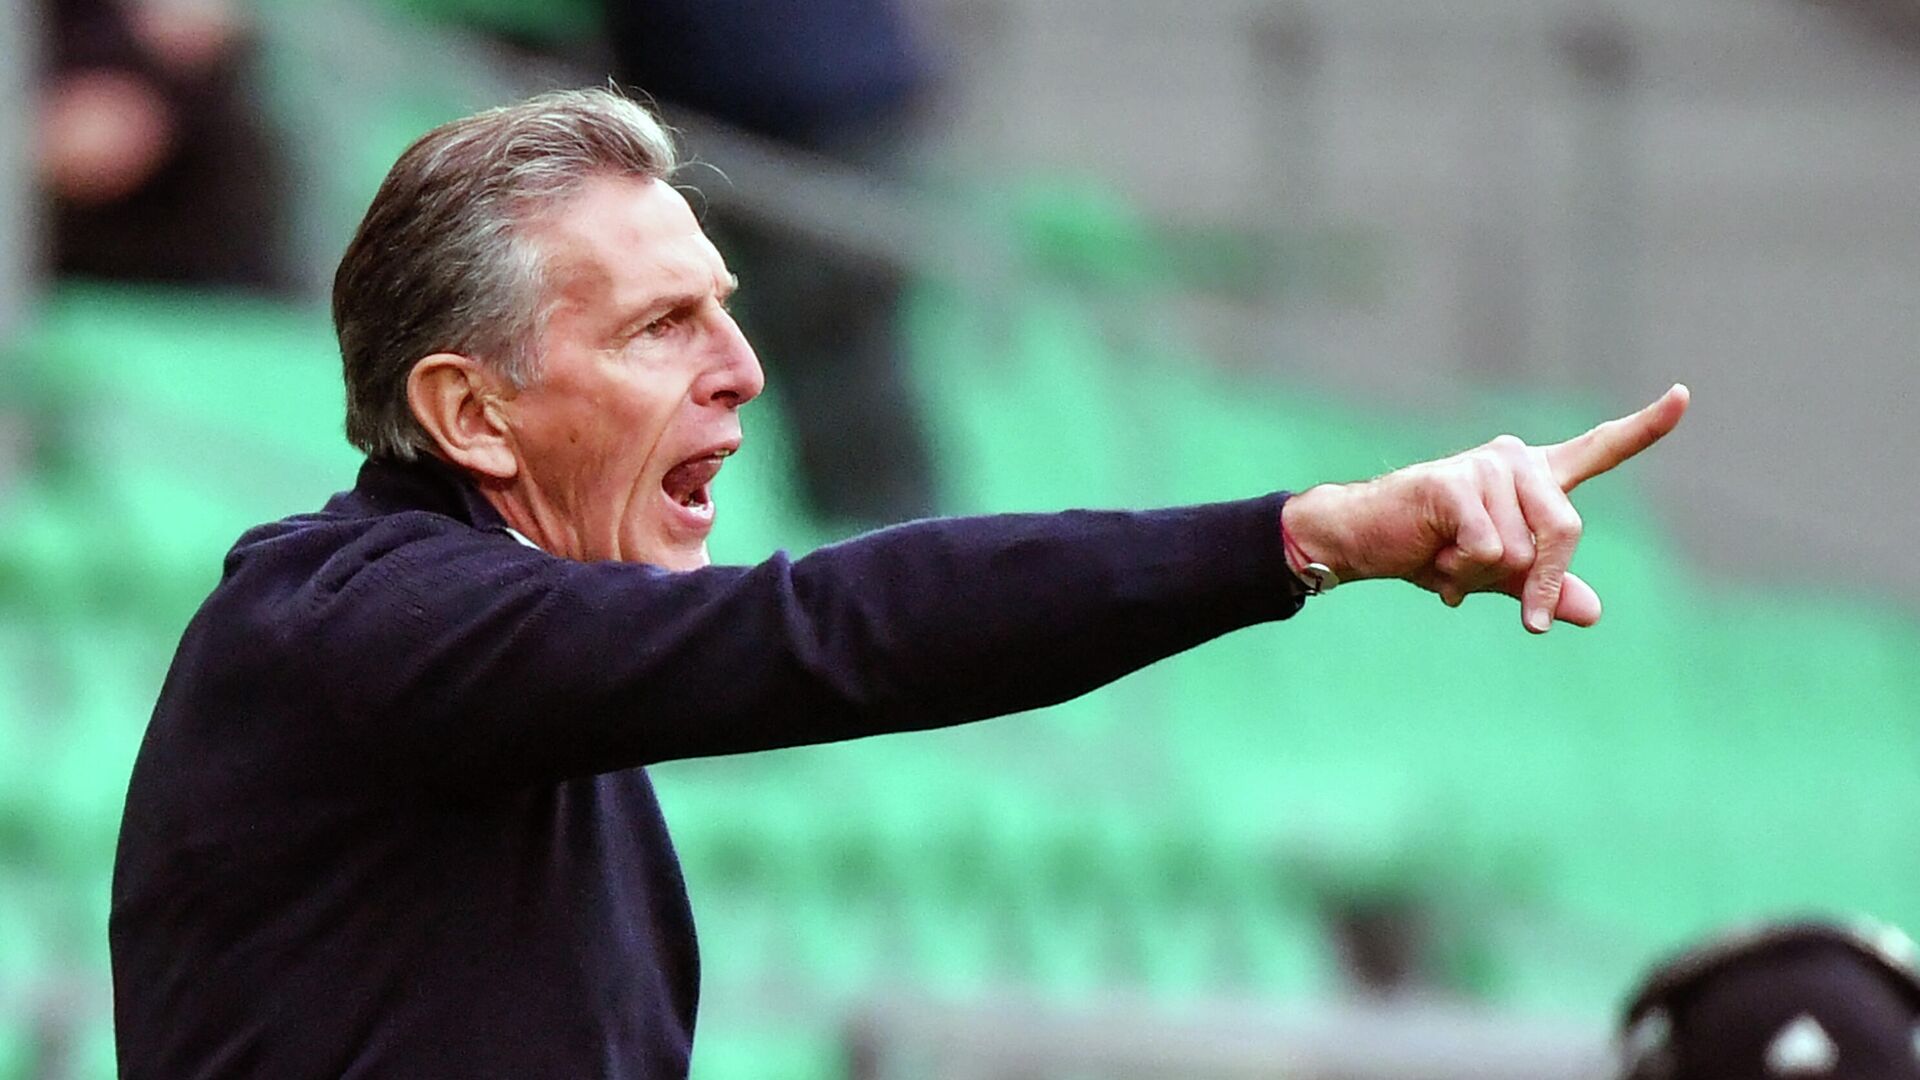 Saint-Etienne's French head coach Claude Puel gestures during the French L1 football match between AS Saint-Etienne and Clermont Foot 63 at the Geoffroy-Guichard stadium in Saint-Etienne, central France, on November 7, 2021. (Photo by PHILIPPE DESMAZES / AFP) - РИА Новости, 1920, 06.12.2021